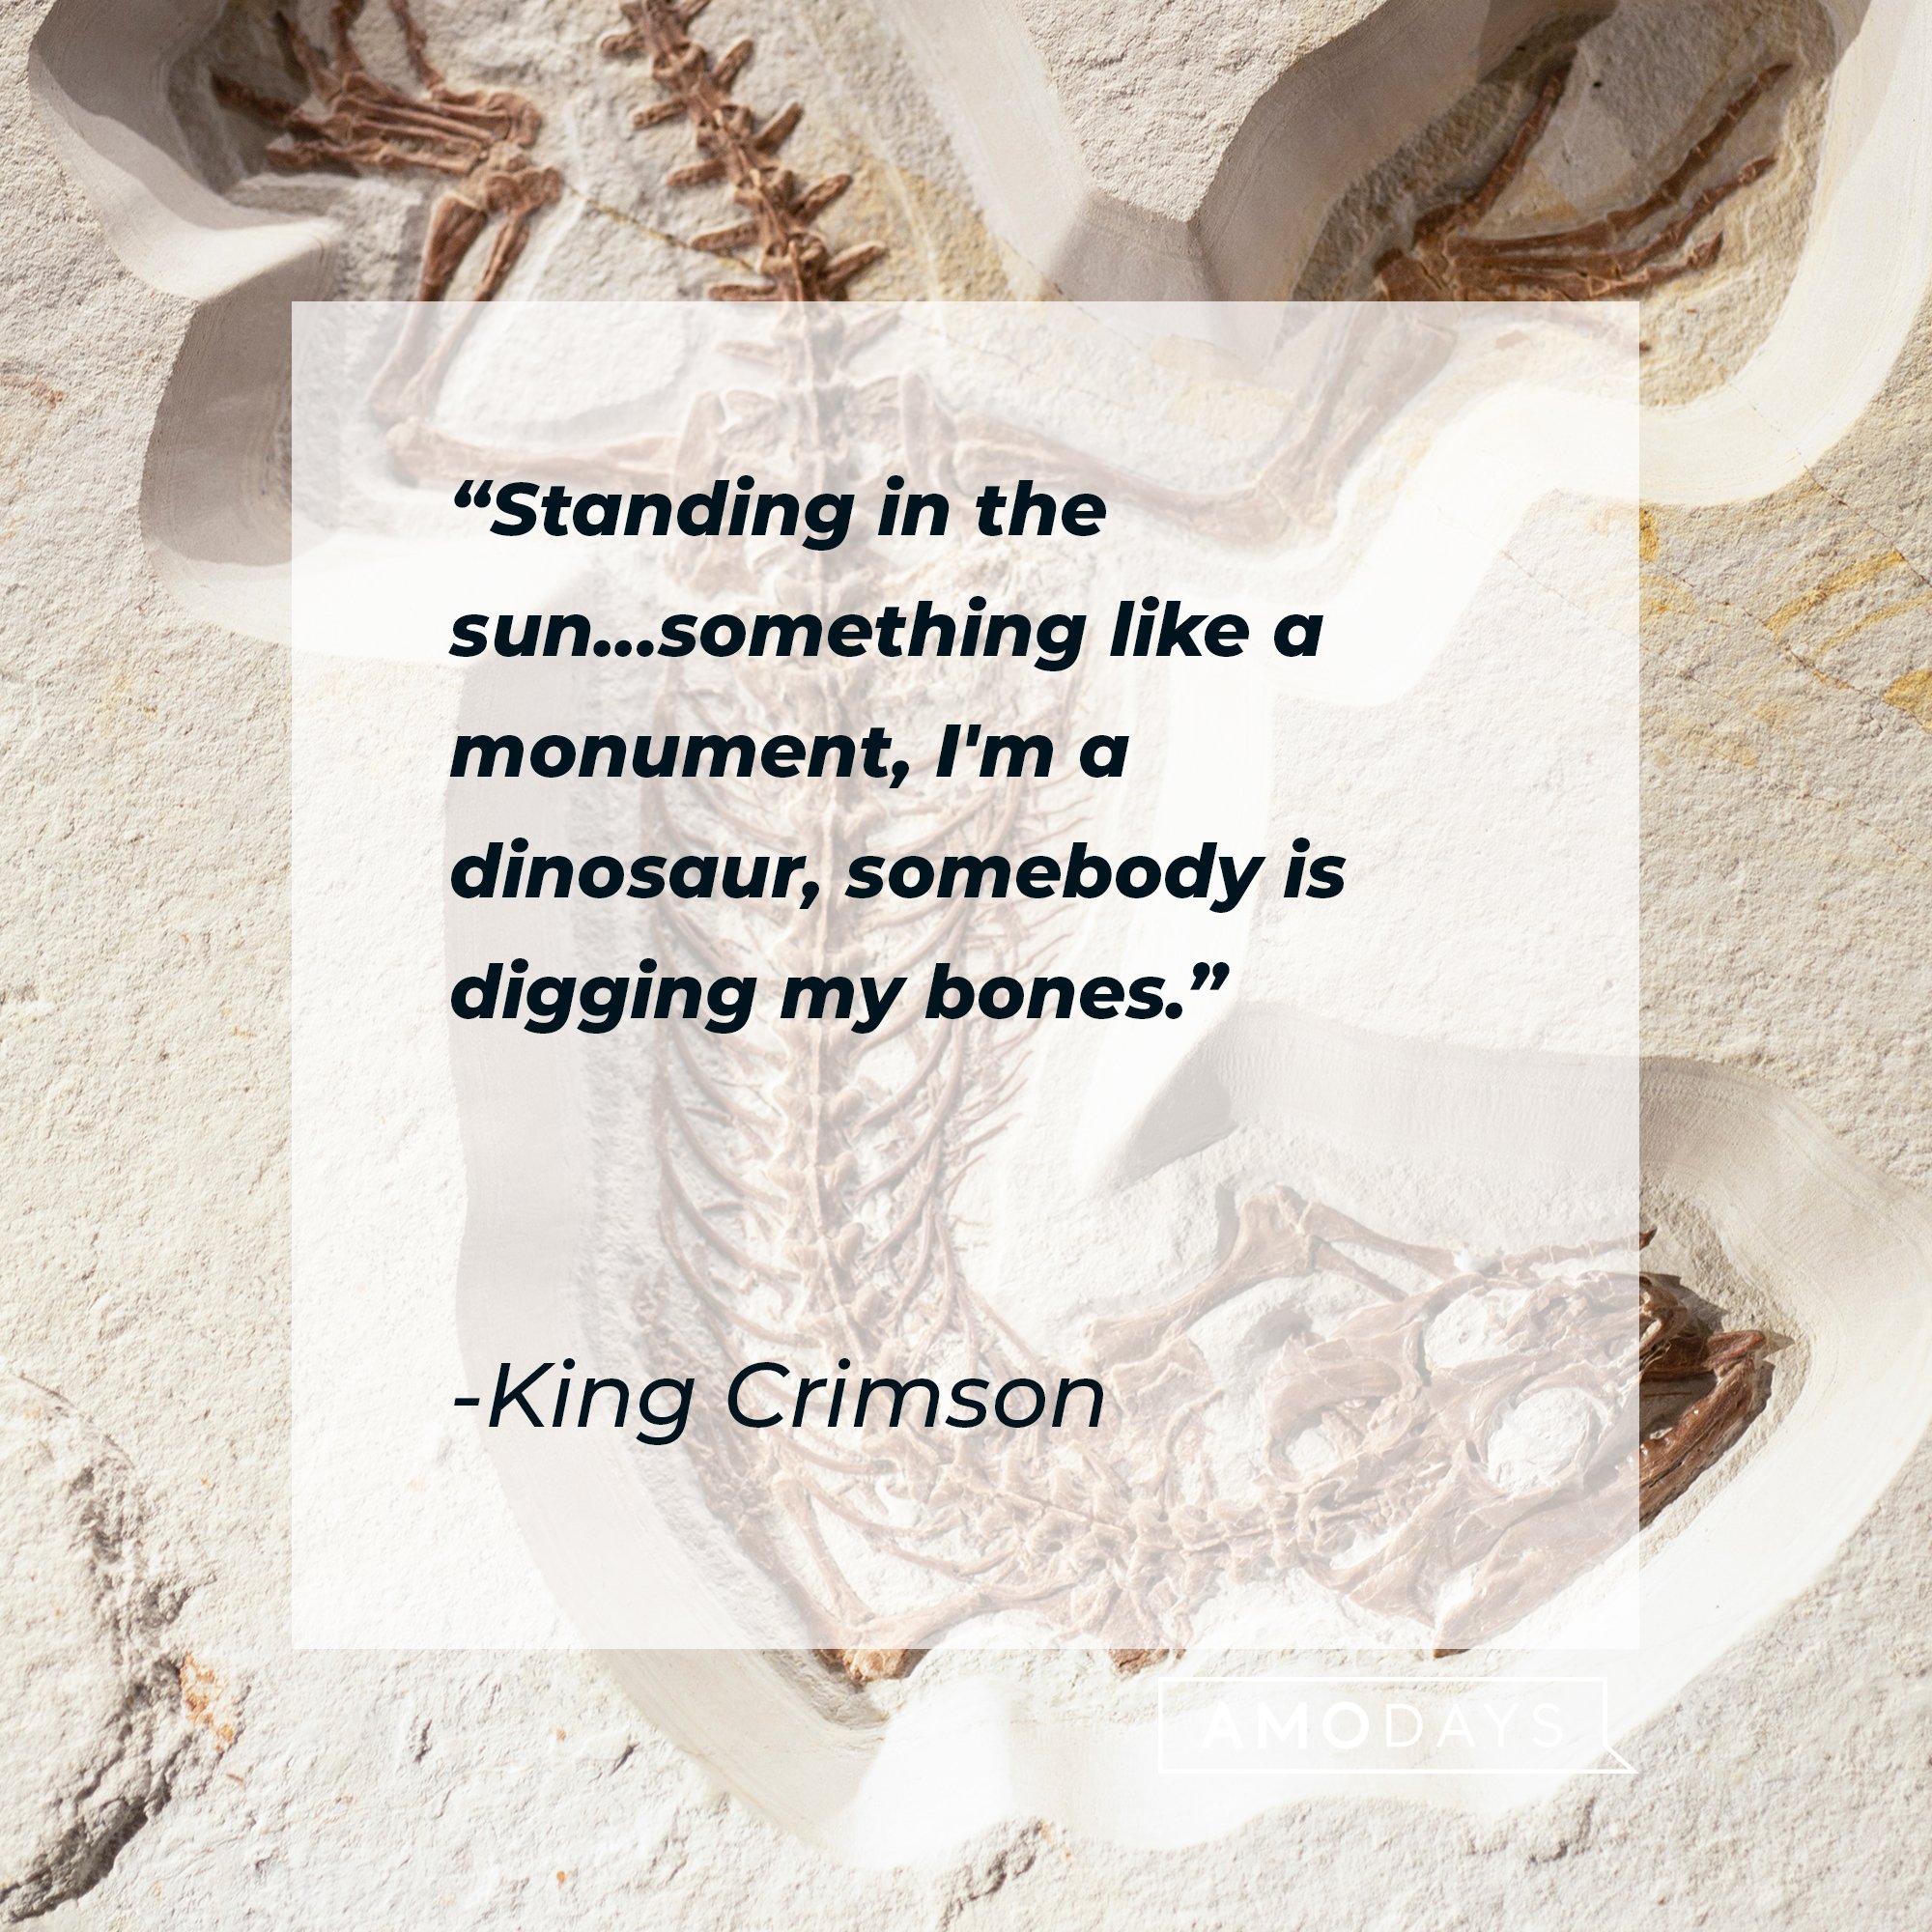 King Crimson’s quote: "Standing in the sun…something like a monument, I'm a dinosaur, somebody is digging my bones." | Image: AmoDays